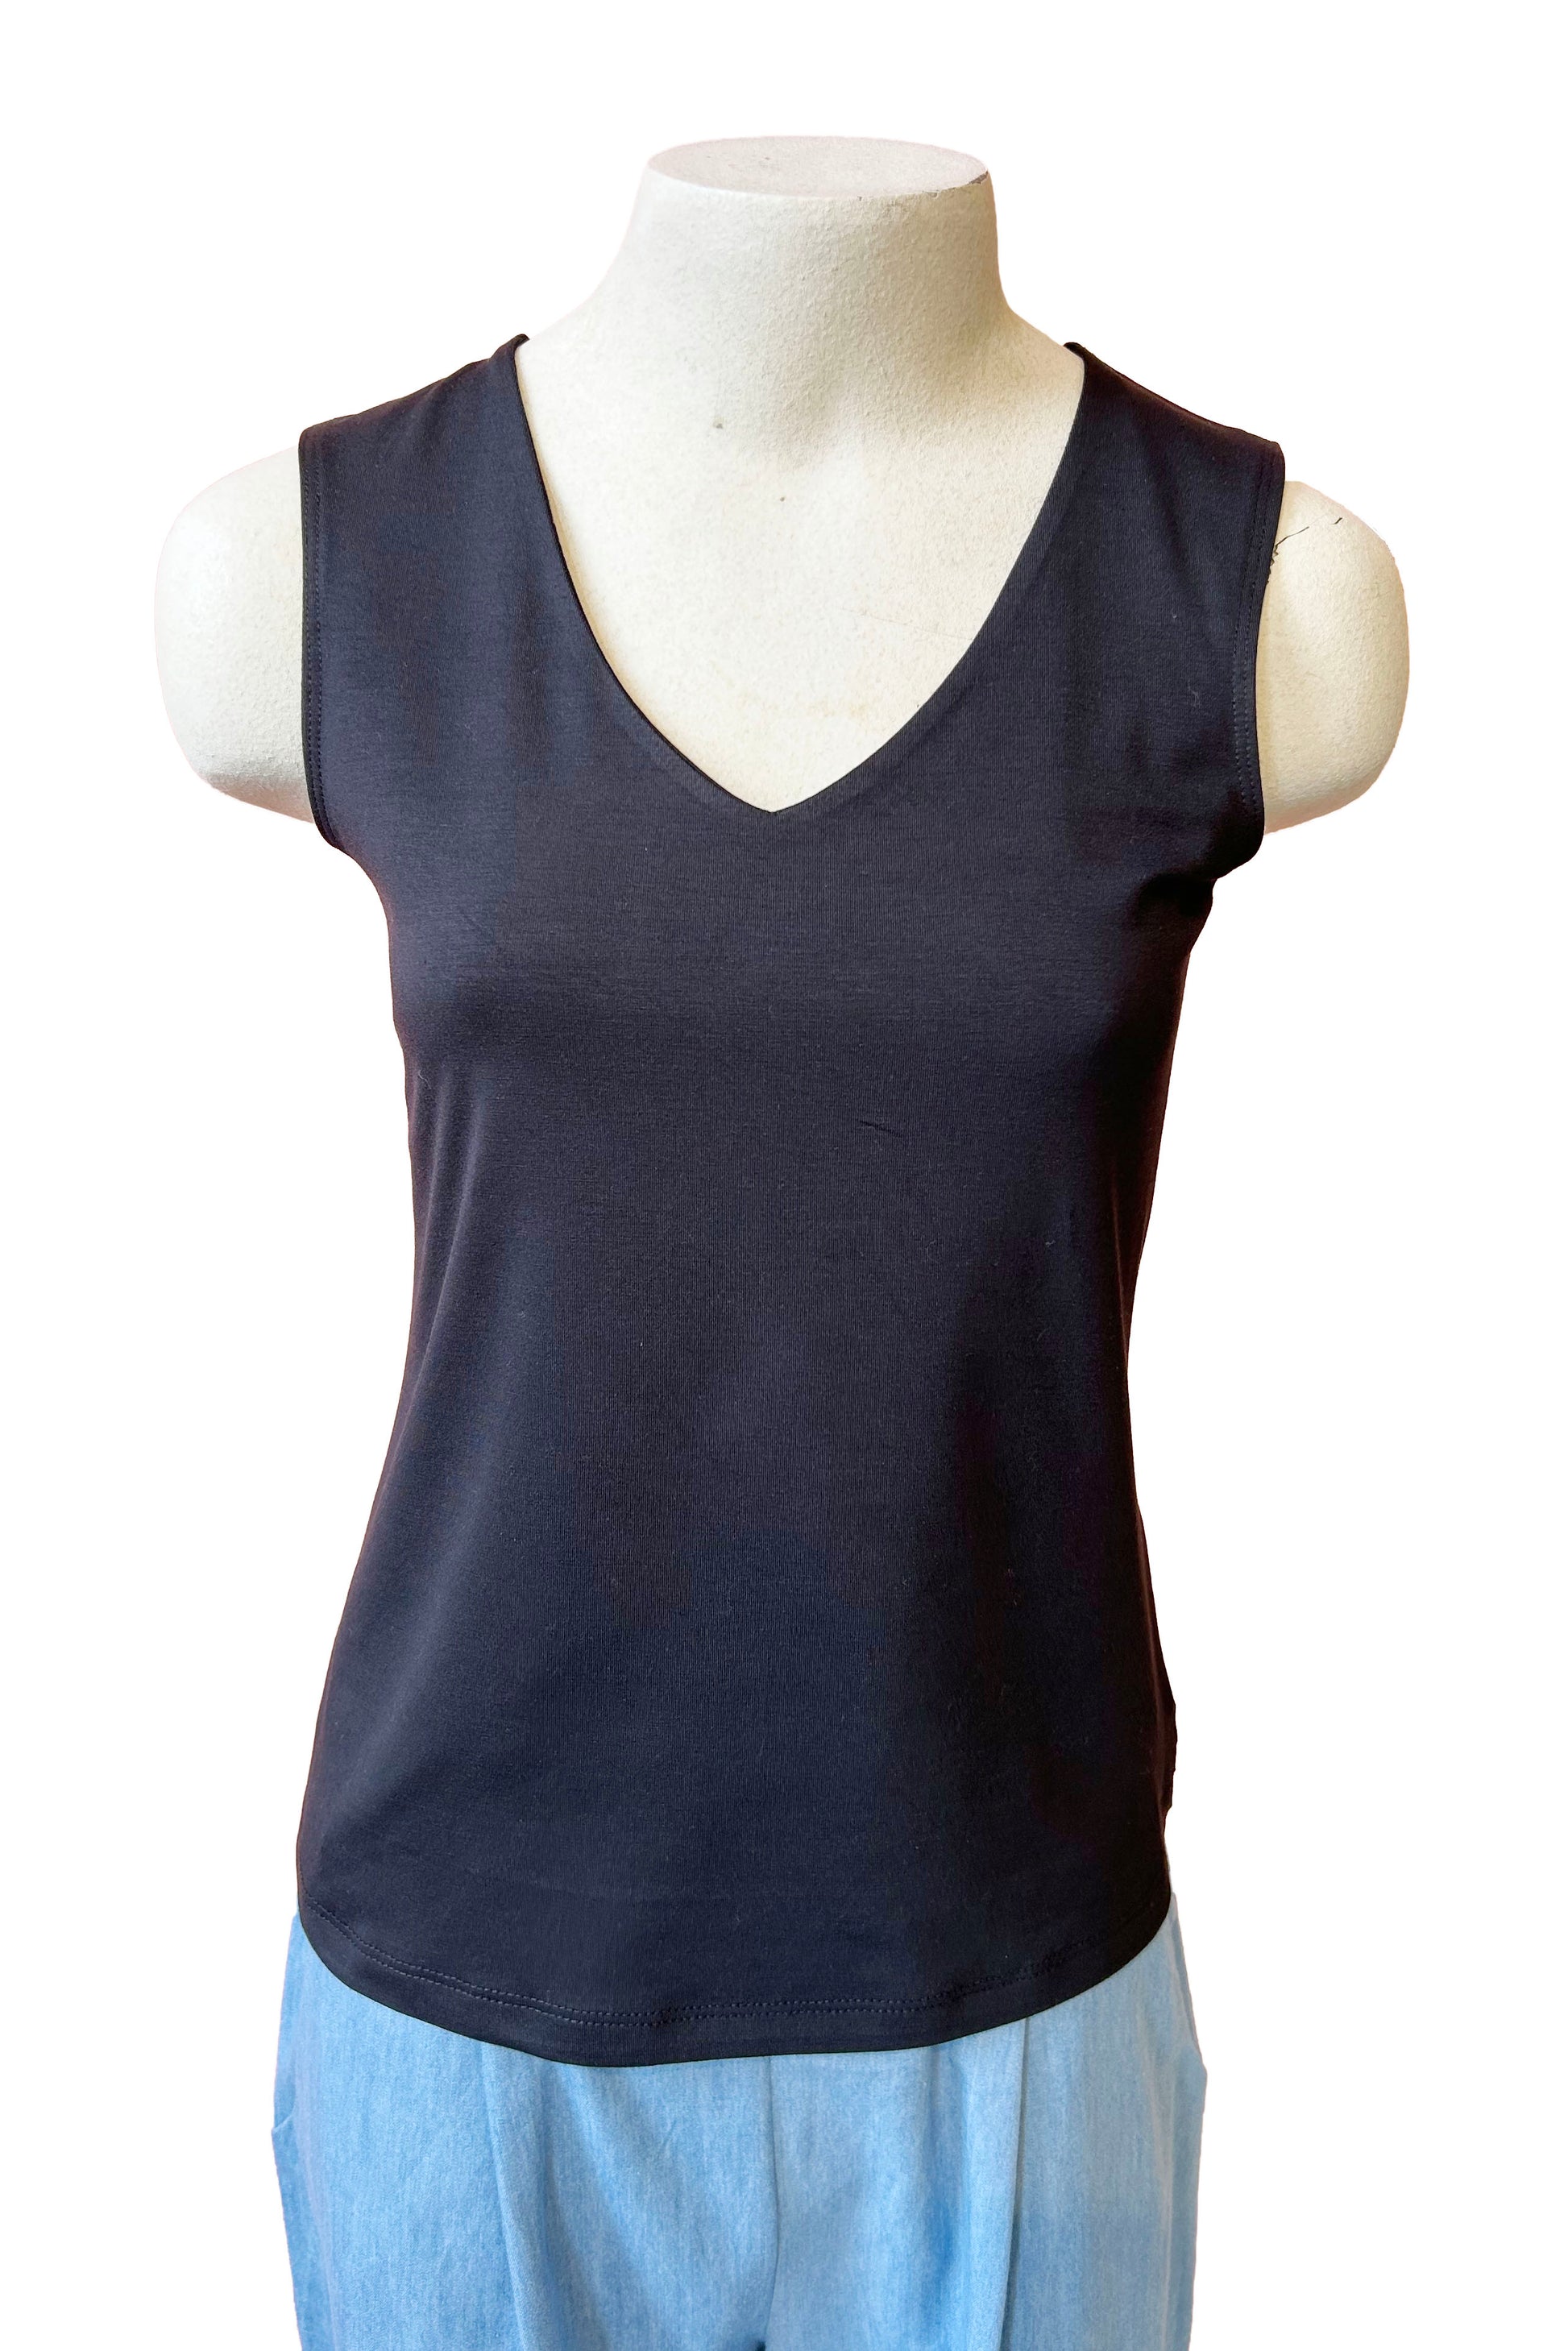 Enjoy Cami by Luc Fontaine, Black, wide straps, V-neck, front has a double layer of fabric, slightly relaxed fit, sizes 4-16, made in Montreal 